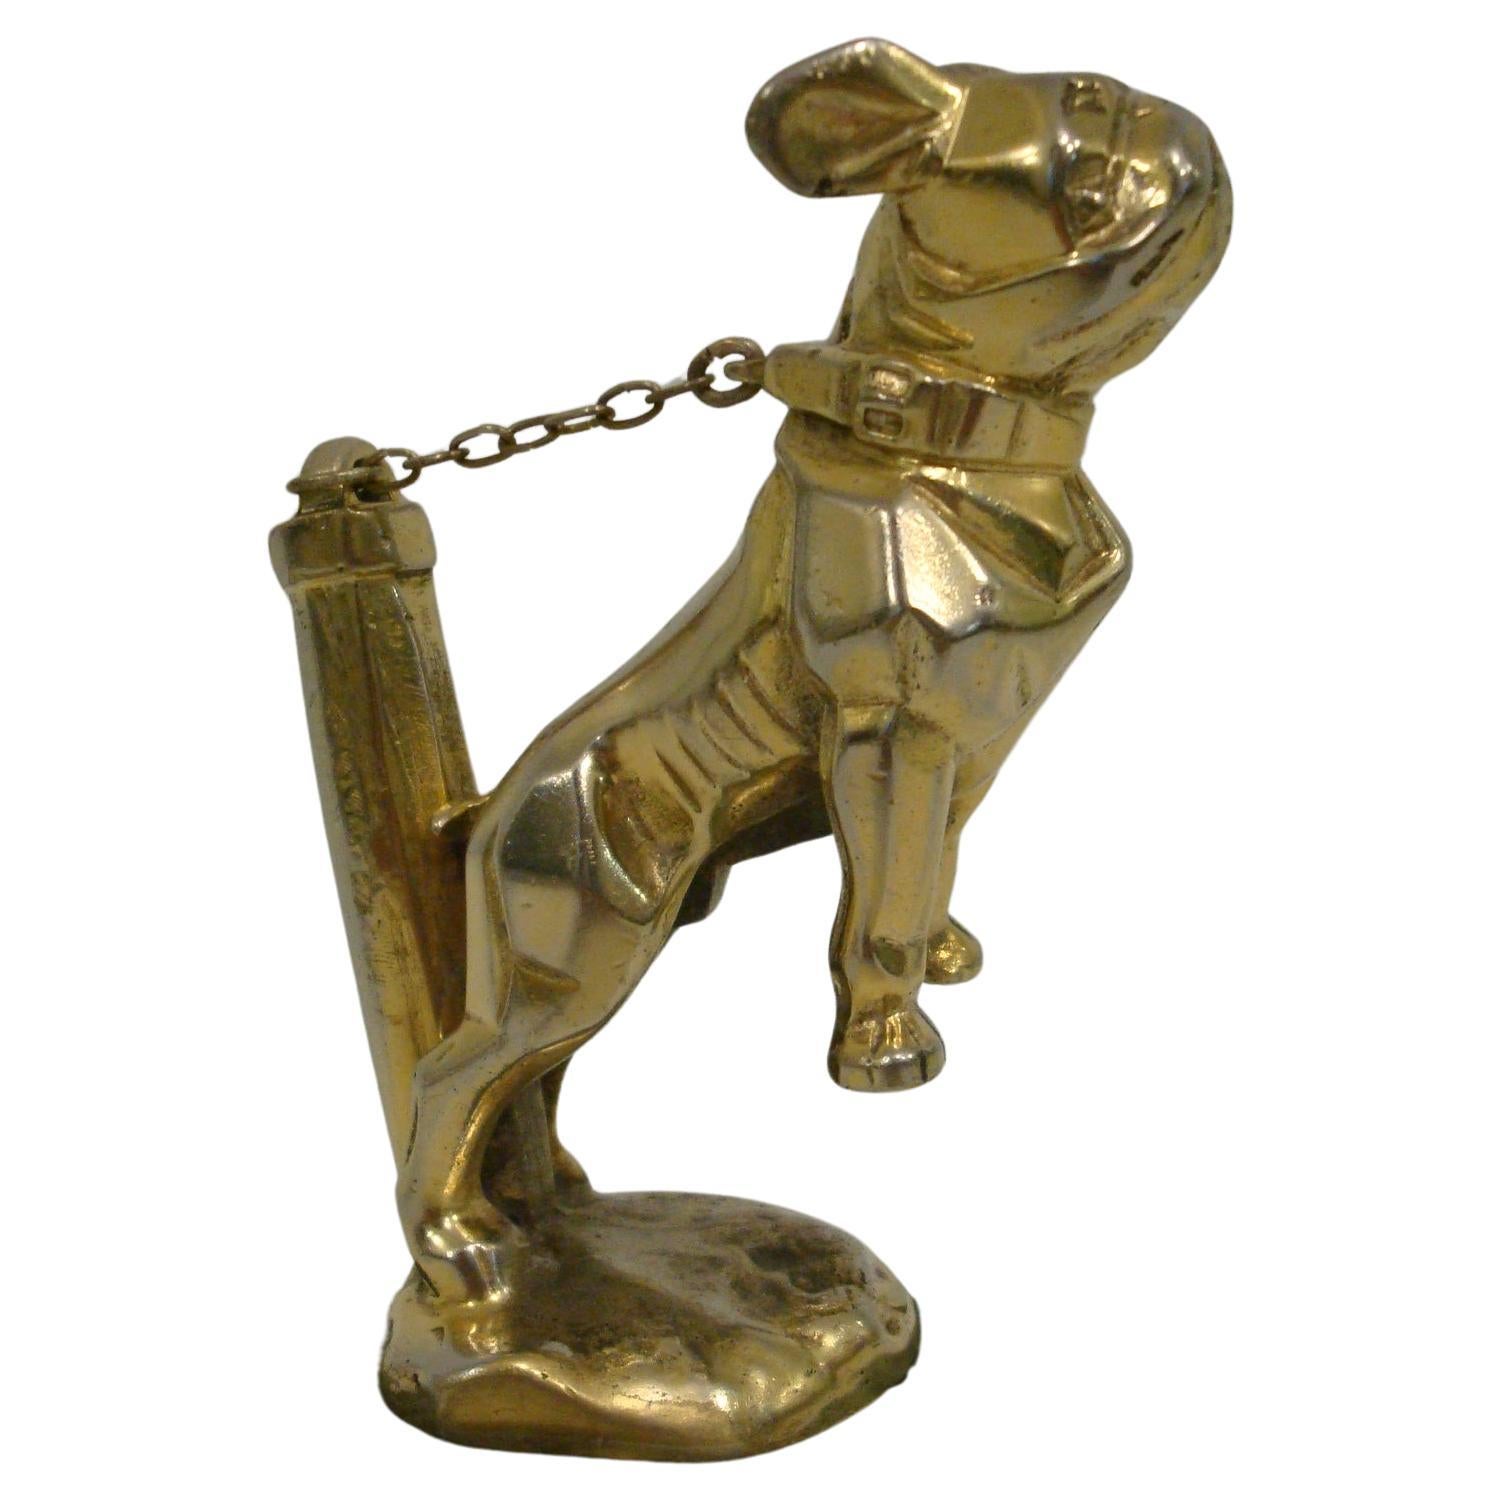 Art Deco 'Chained Bulldog' Car Mascot / Hood Ornament designed by Marvel, French, 1920´s, silver-Gilt plated bronze, small version, 14cm long, complete with chain. Very nice desk piece of Automobilia.

Some info of similar dogs
Mascottes Passion,